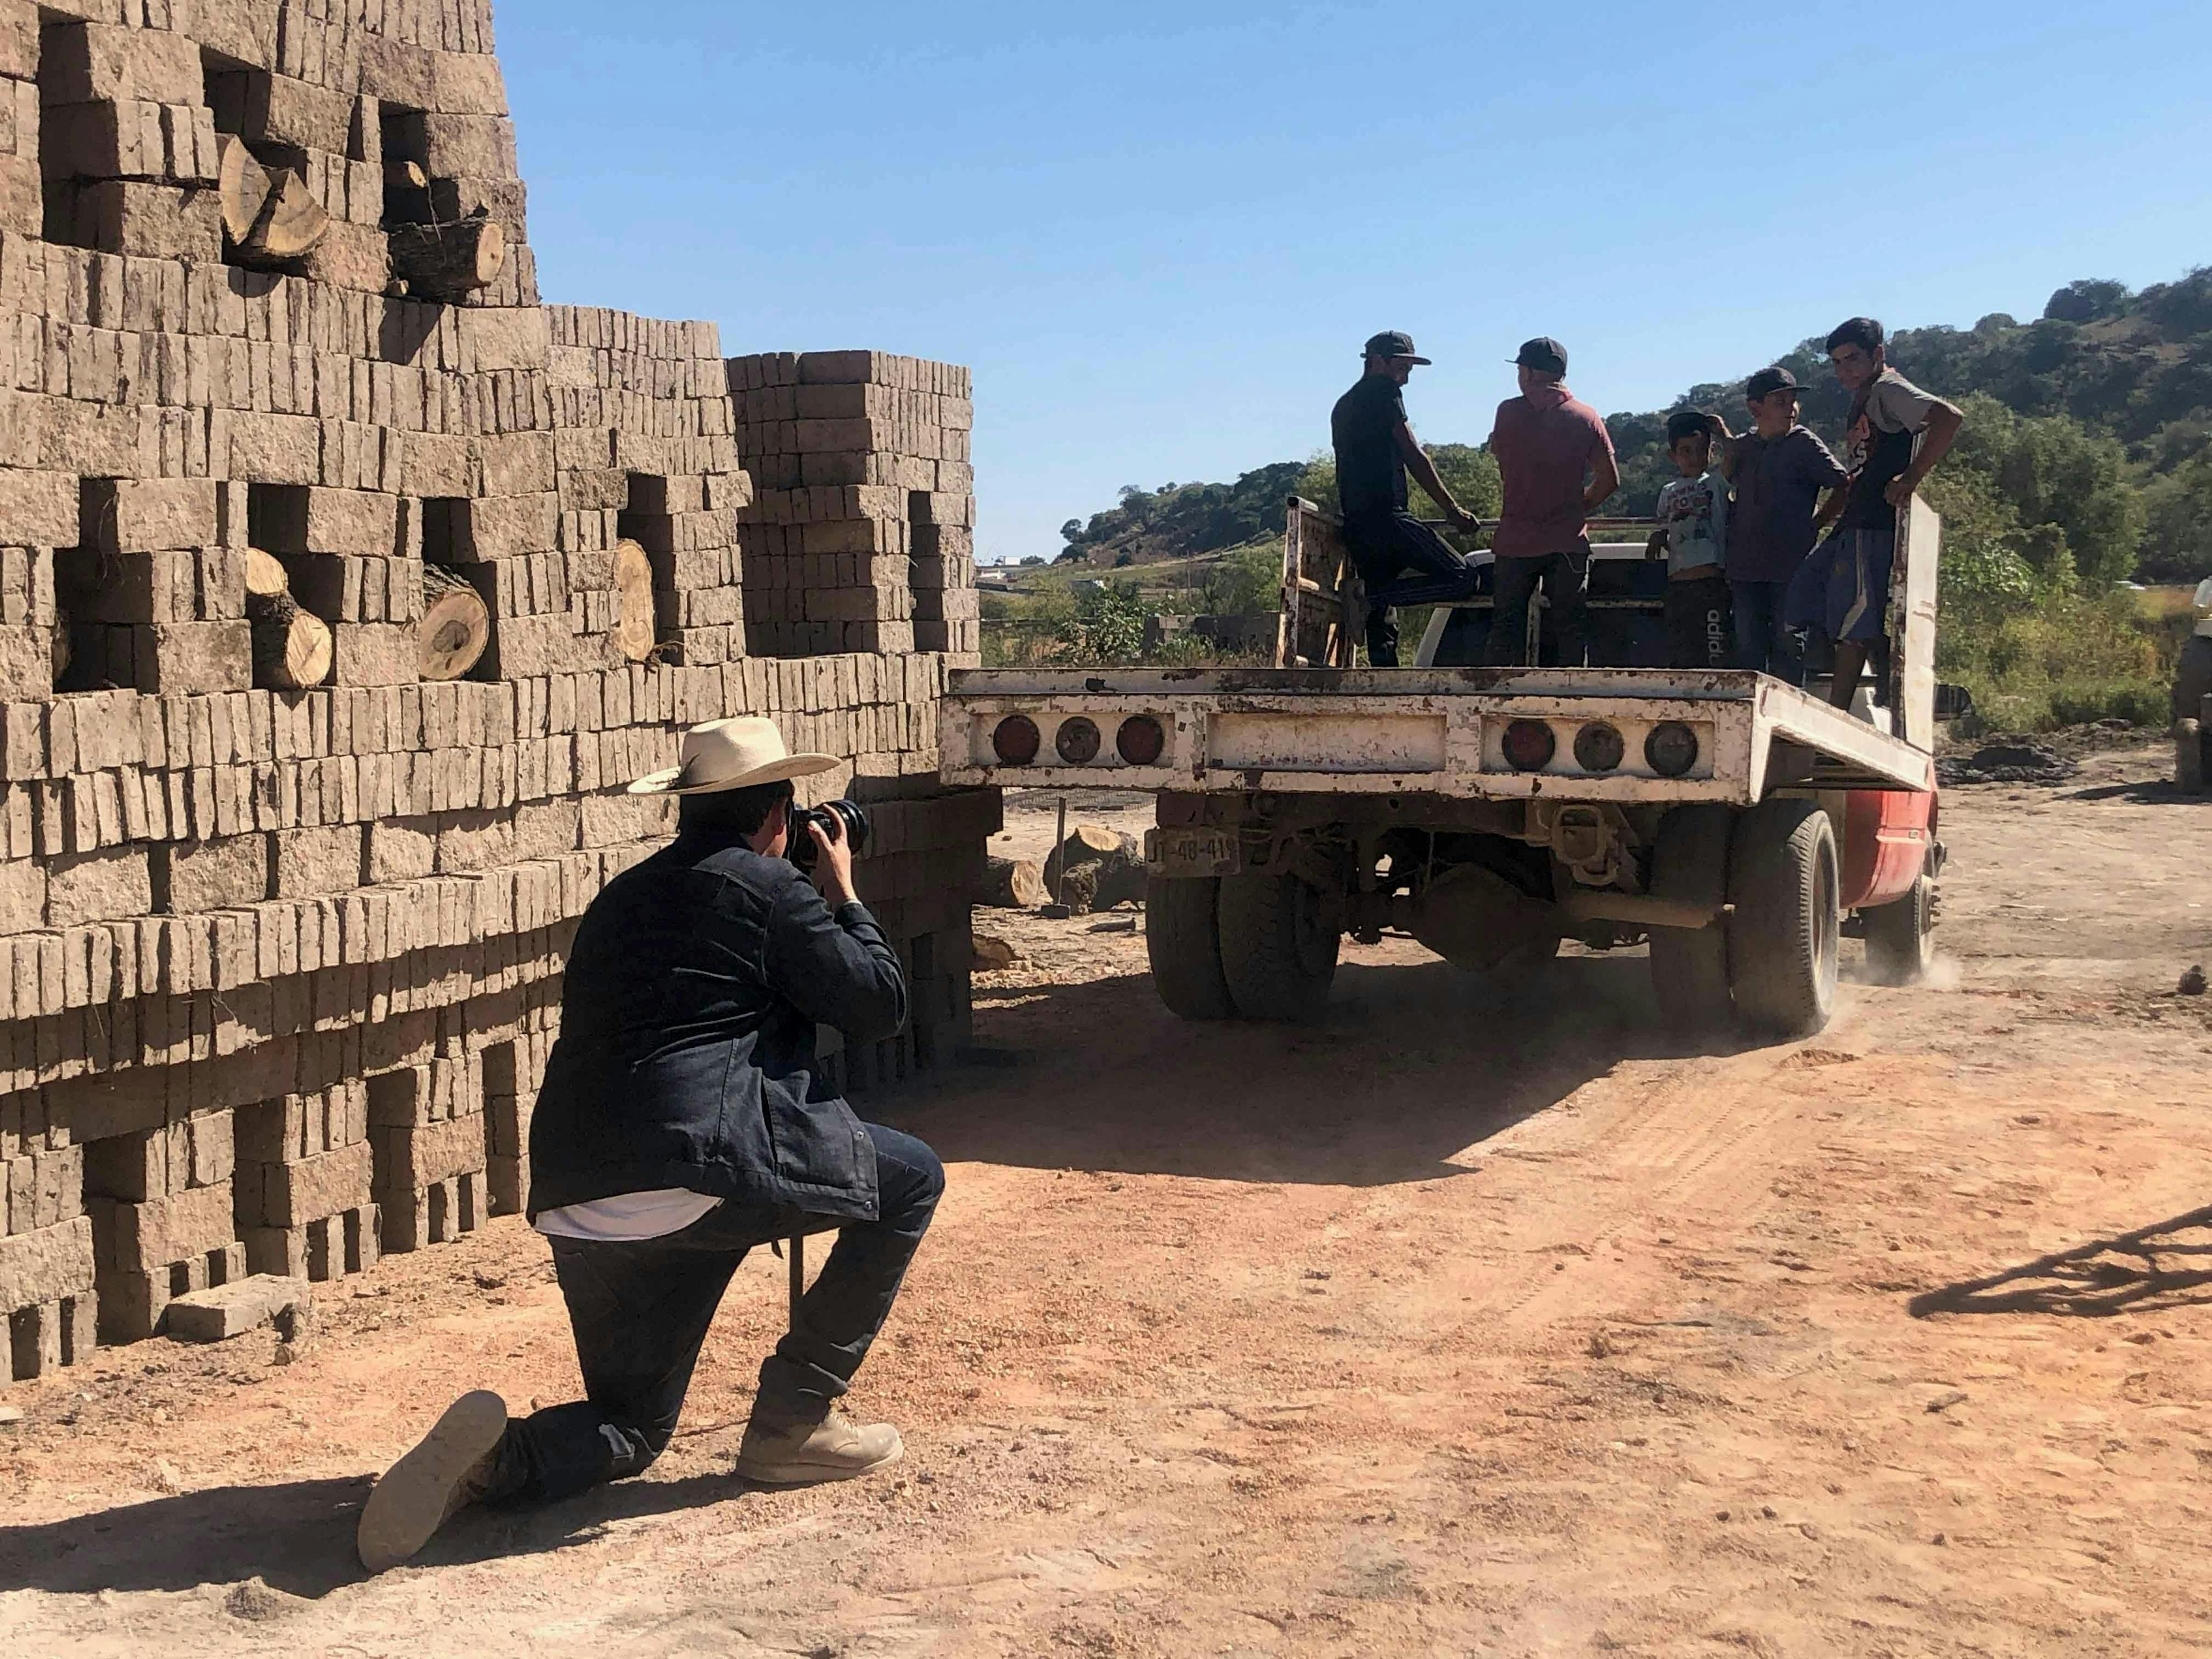 Almanza Pereda photographing the kiln assembly crew in Magdalena.